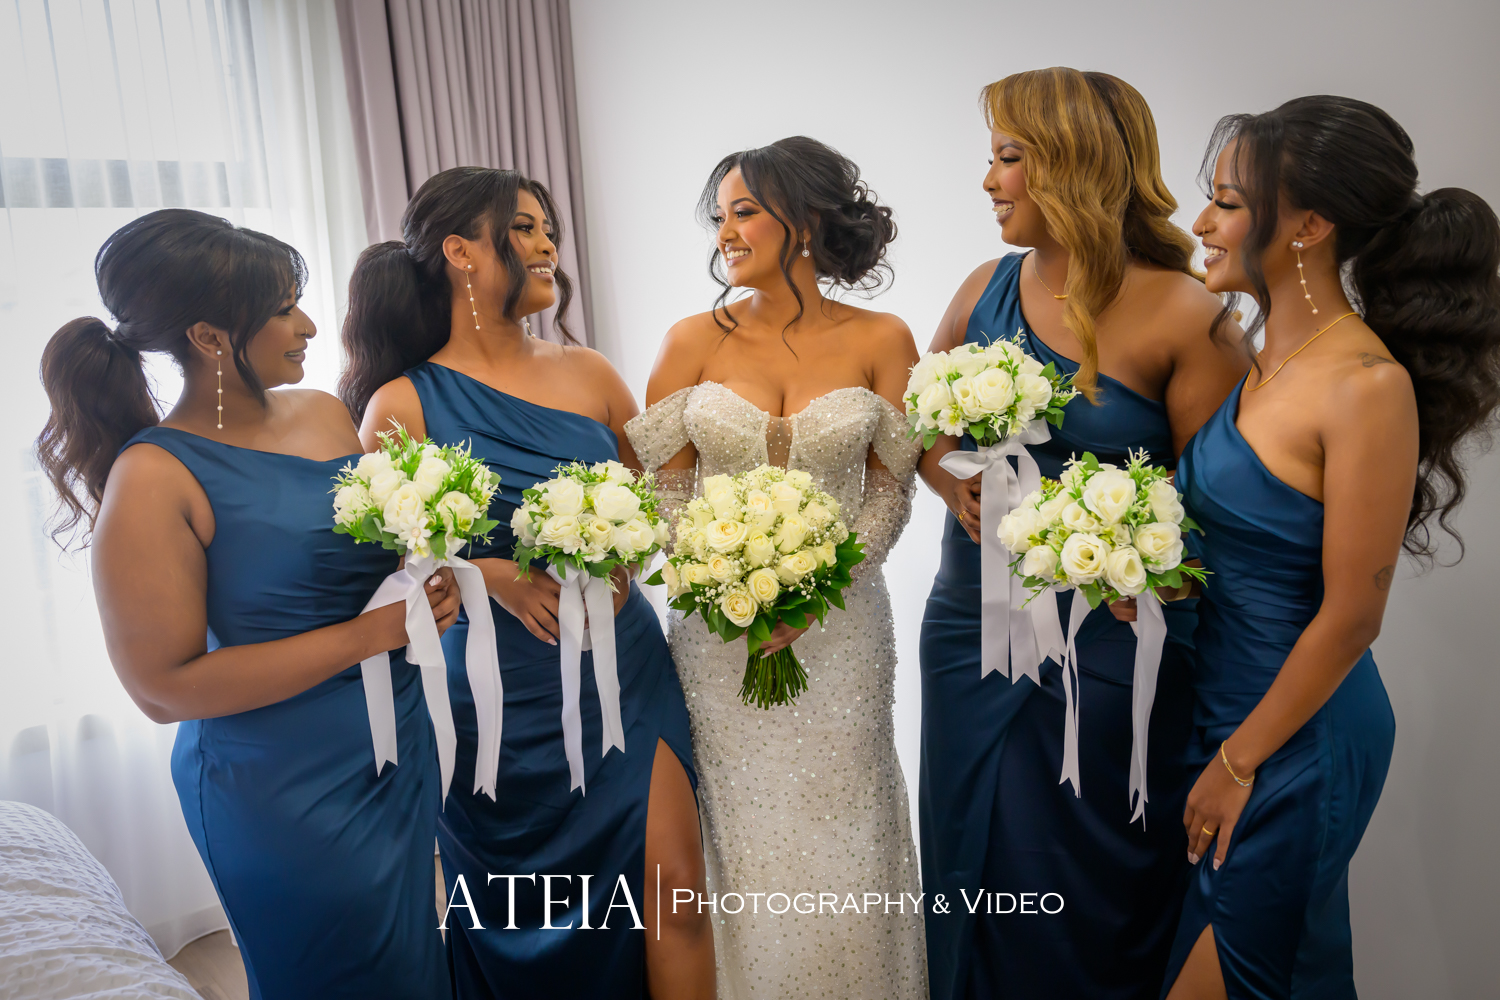 , Trhas and Michael&#8217;s wedding at Fior Melbourne captured by ATEIA Photography &#038; Video